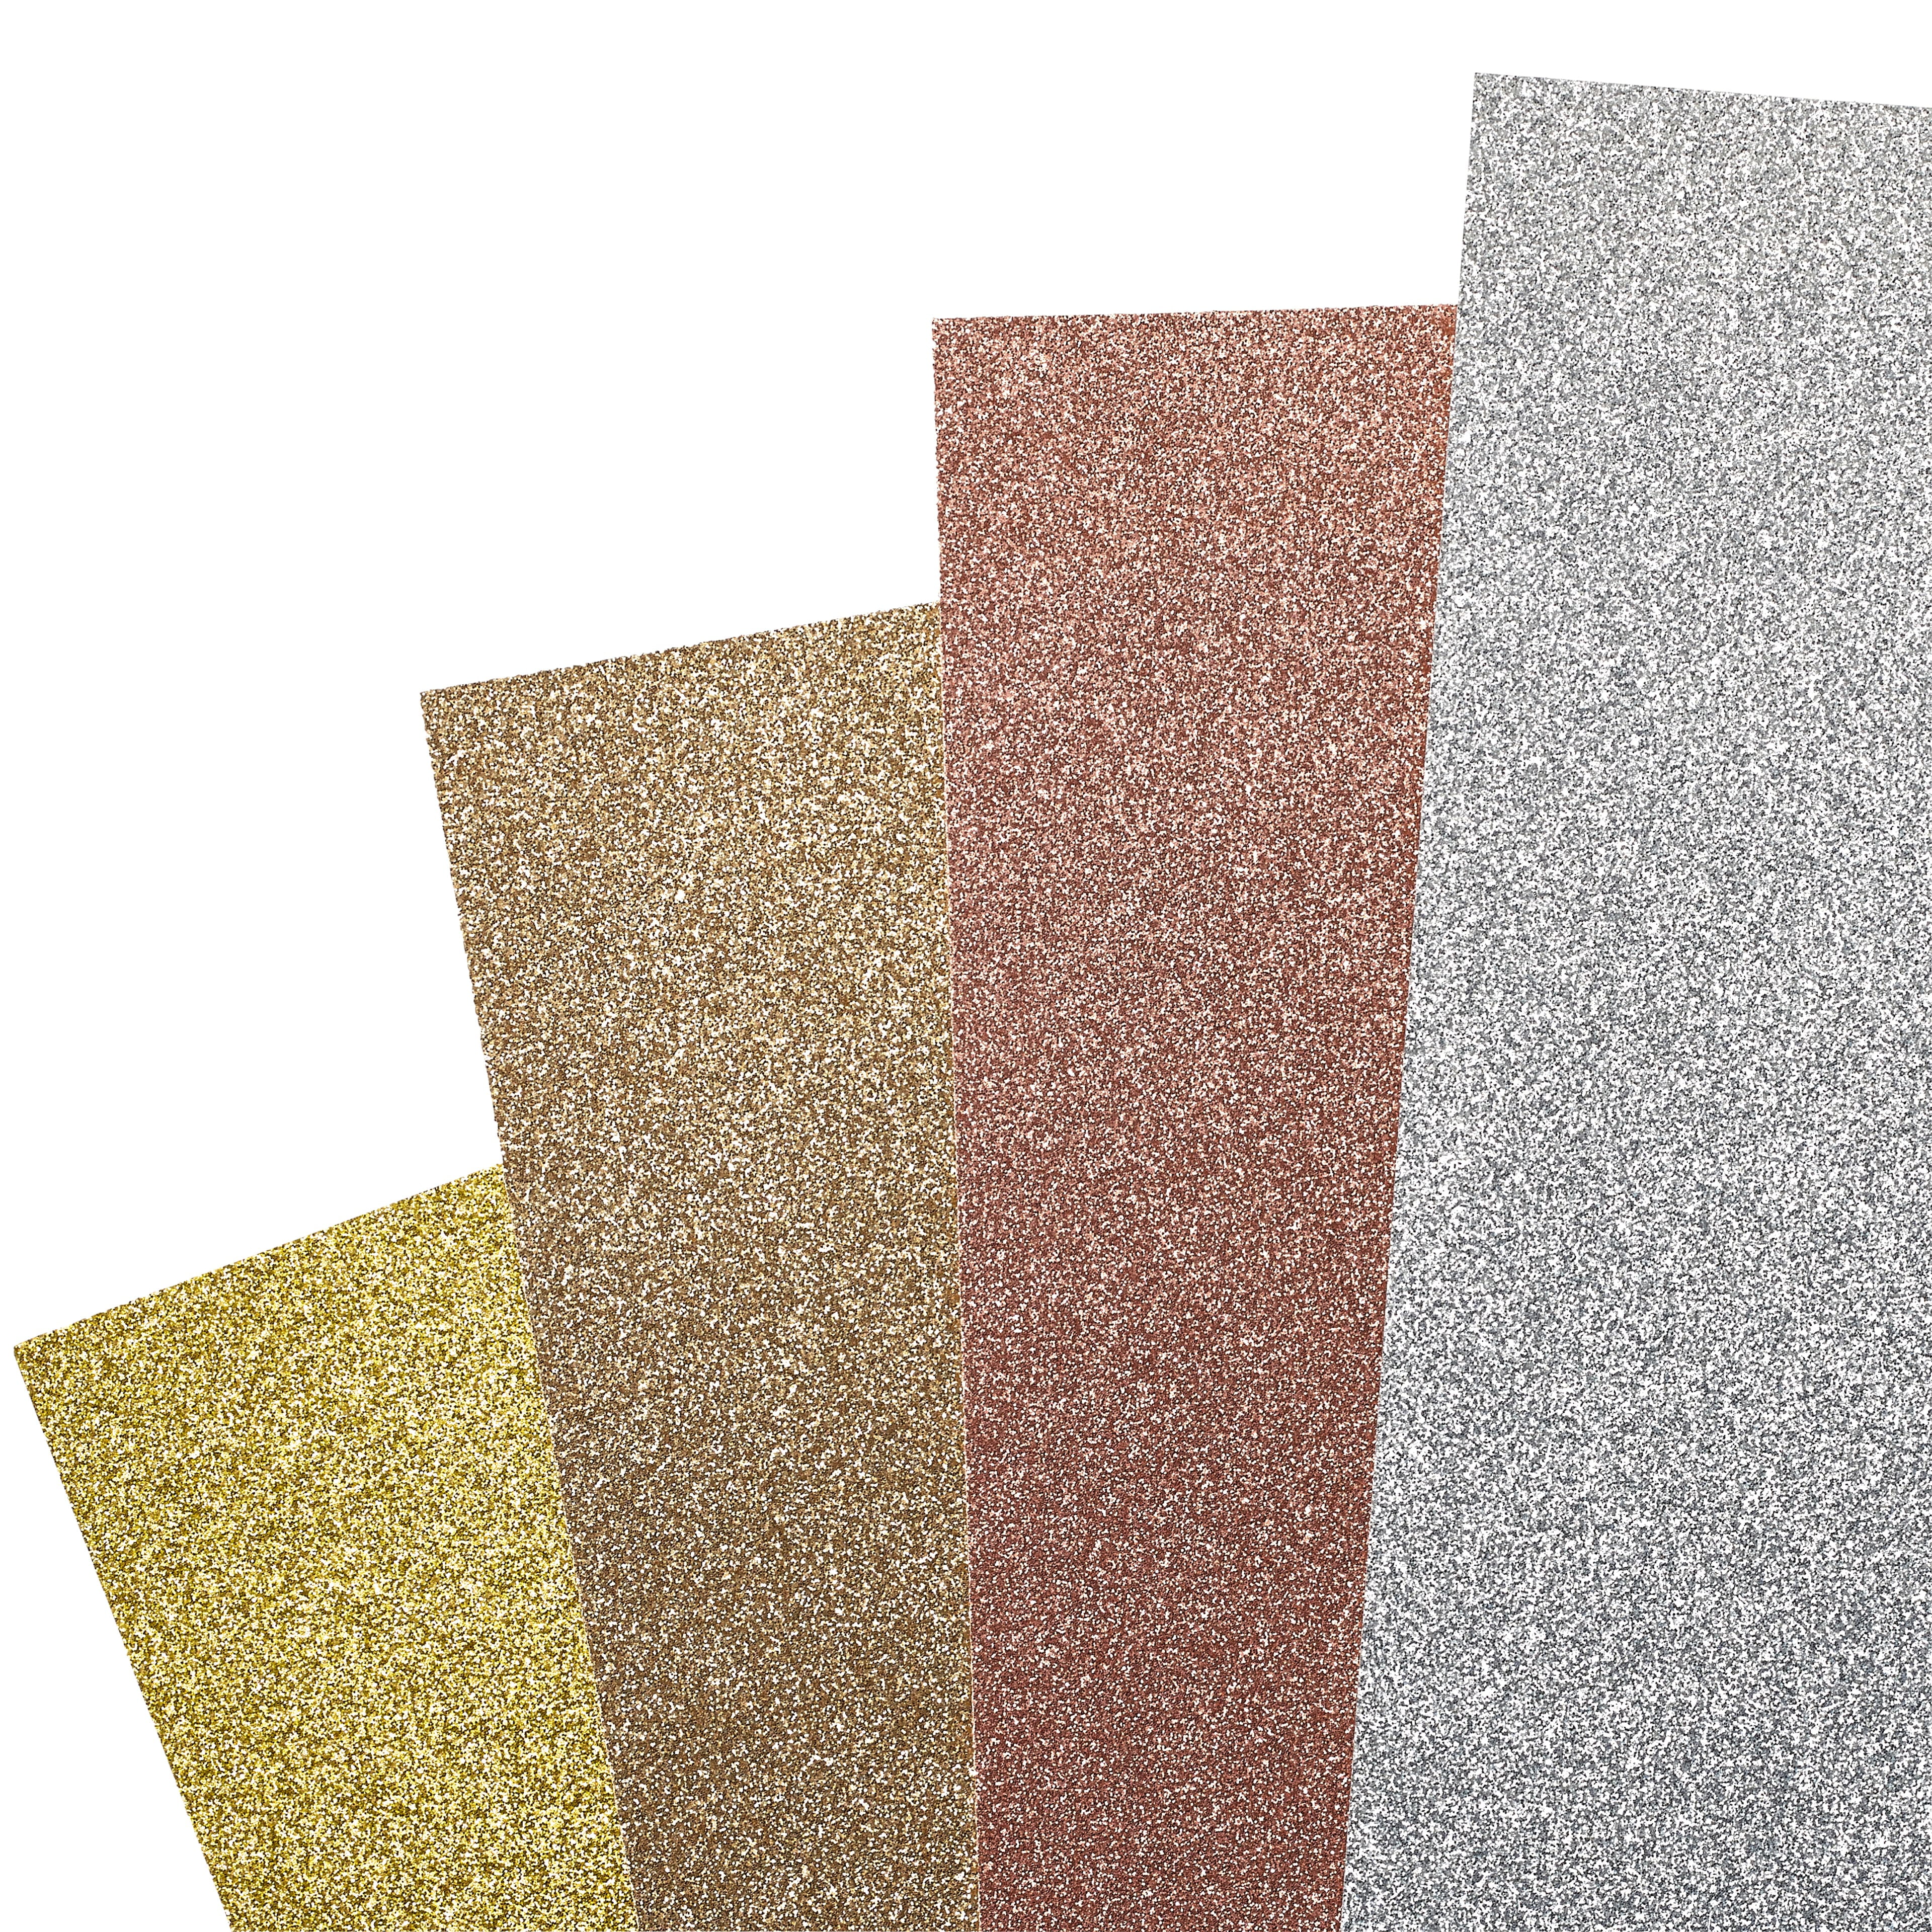 Silver Glitter 8.5 x 11 Cardstock Paper by Recollections™, 24 Sheets